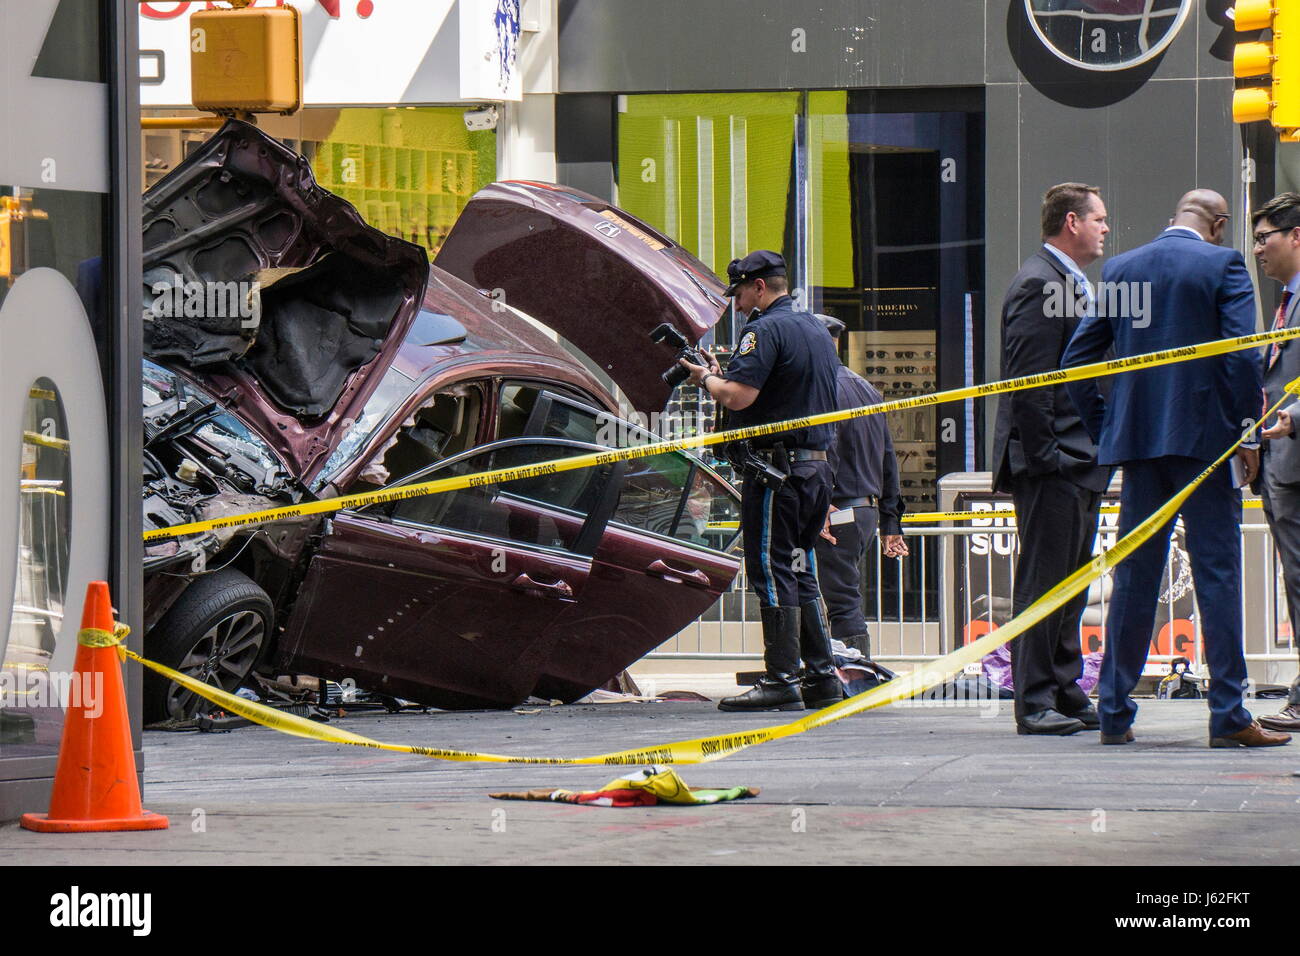 New York, New York, USA. 18th May, 2017. Police officers and emergency workers investigate the scene of a car crash in Times Square that took the life of an 18 year-old Michigan girl and injured 22 others. Credit: Kevin C. Downs/ZUMA Wire/ZUMAPRESS.com/Alamy Live News Stock Photo